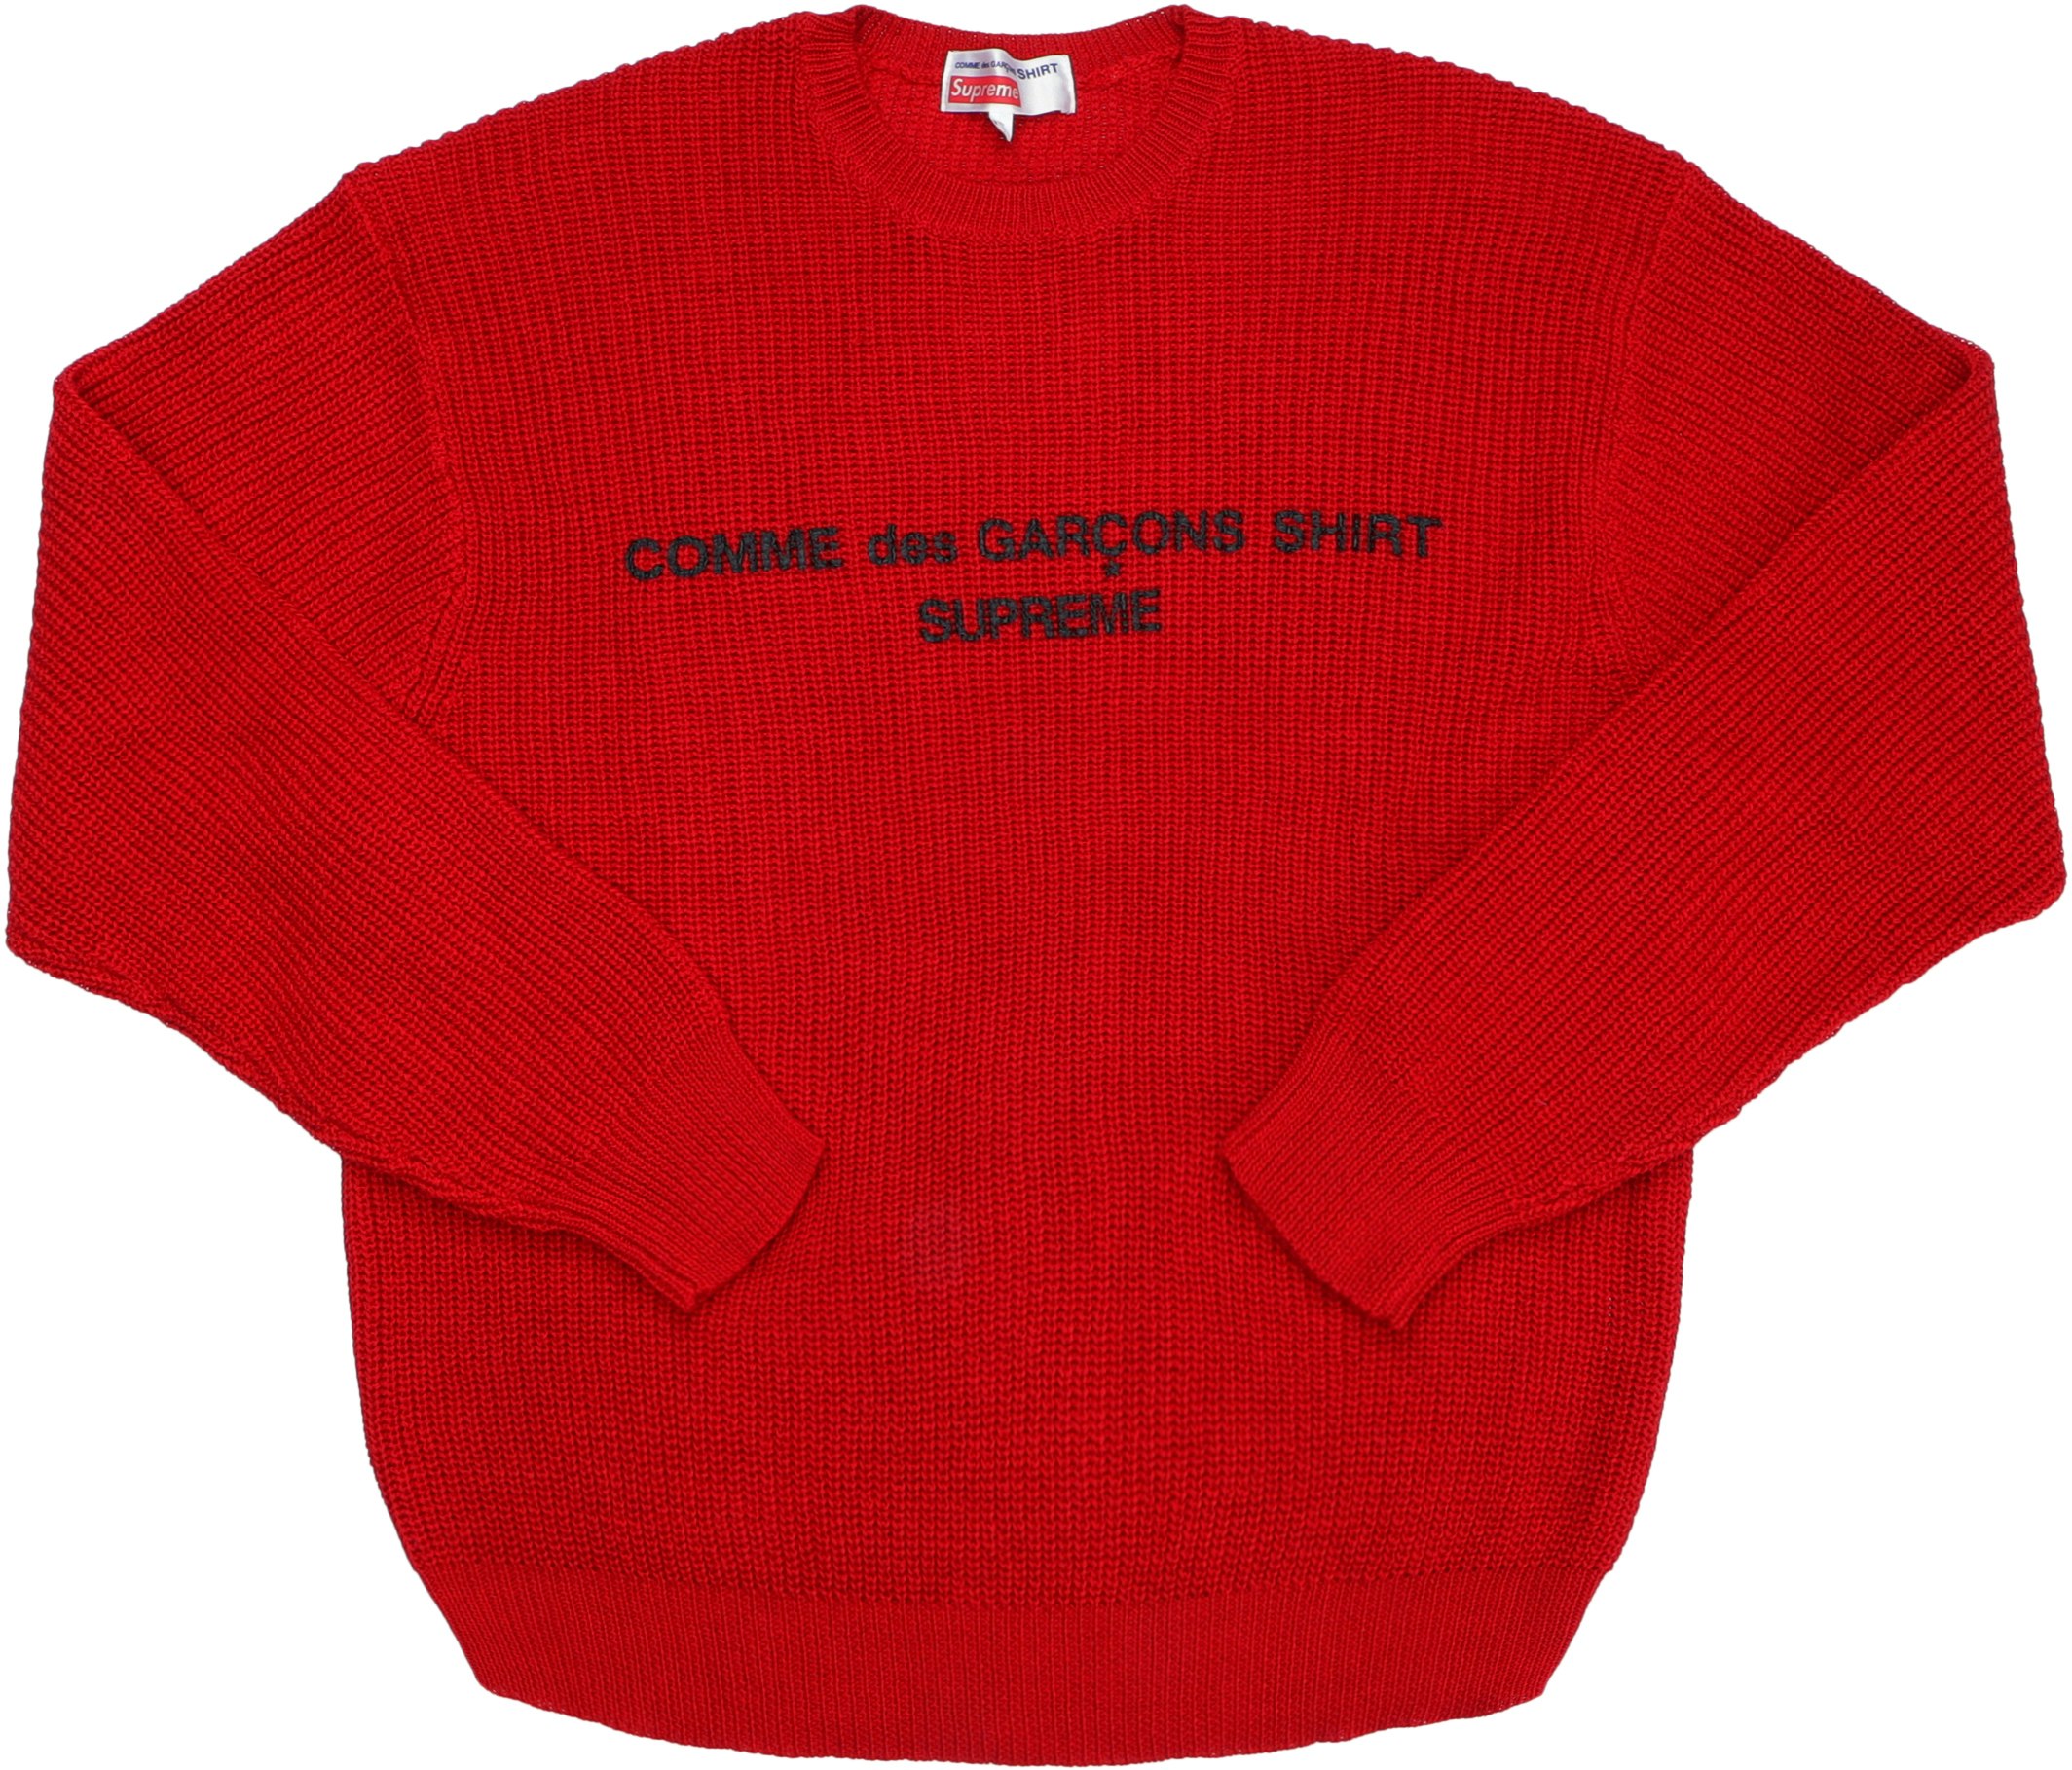 Supreme CDG Comme des Garcons SHIRT Sweater Red